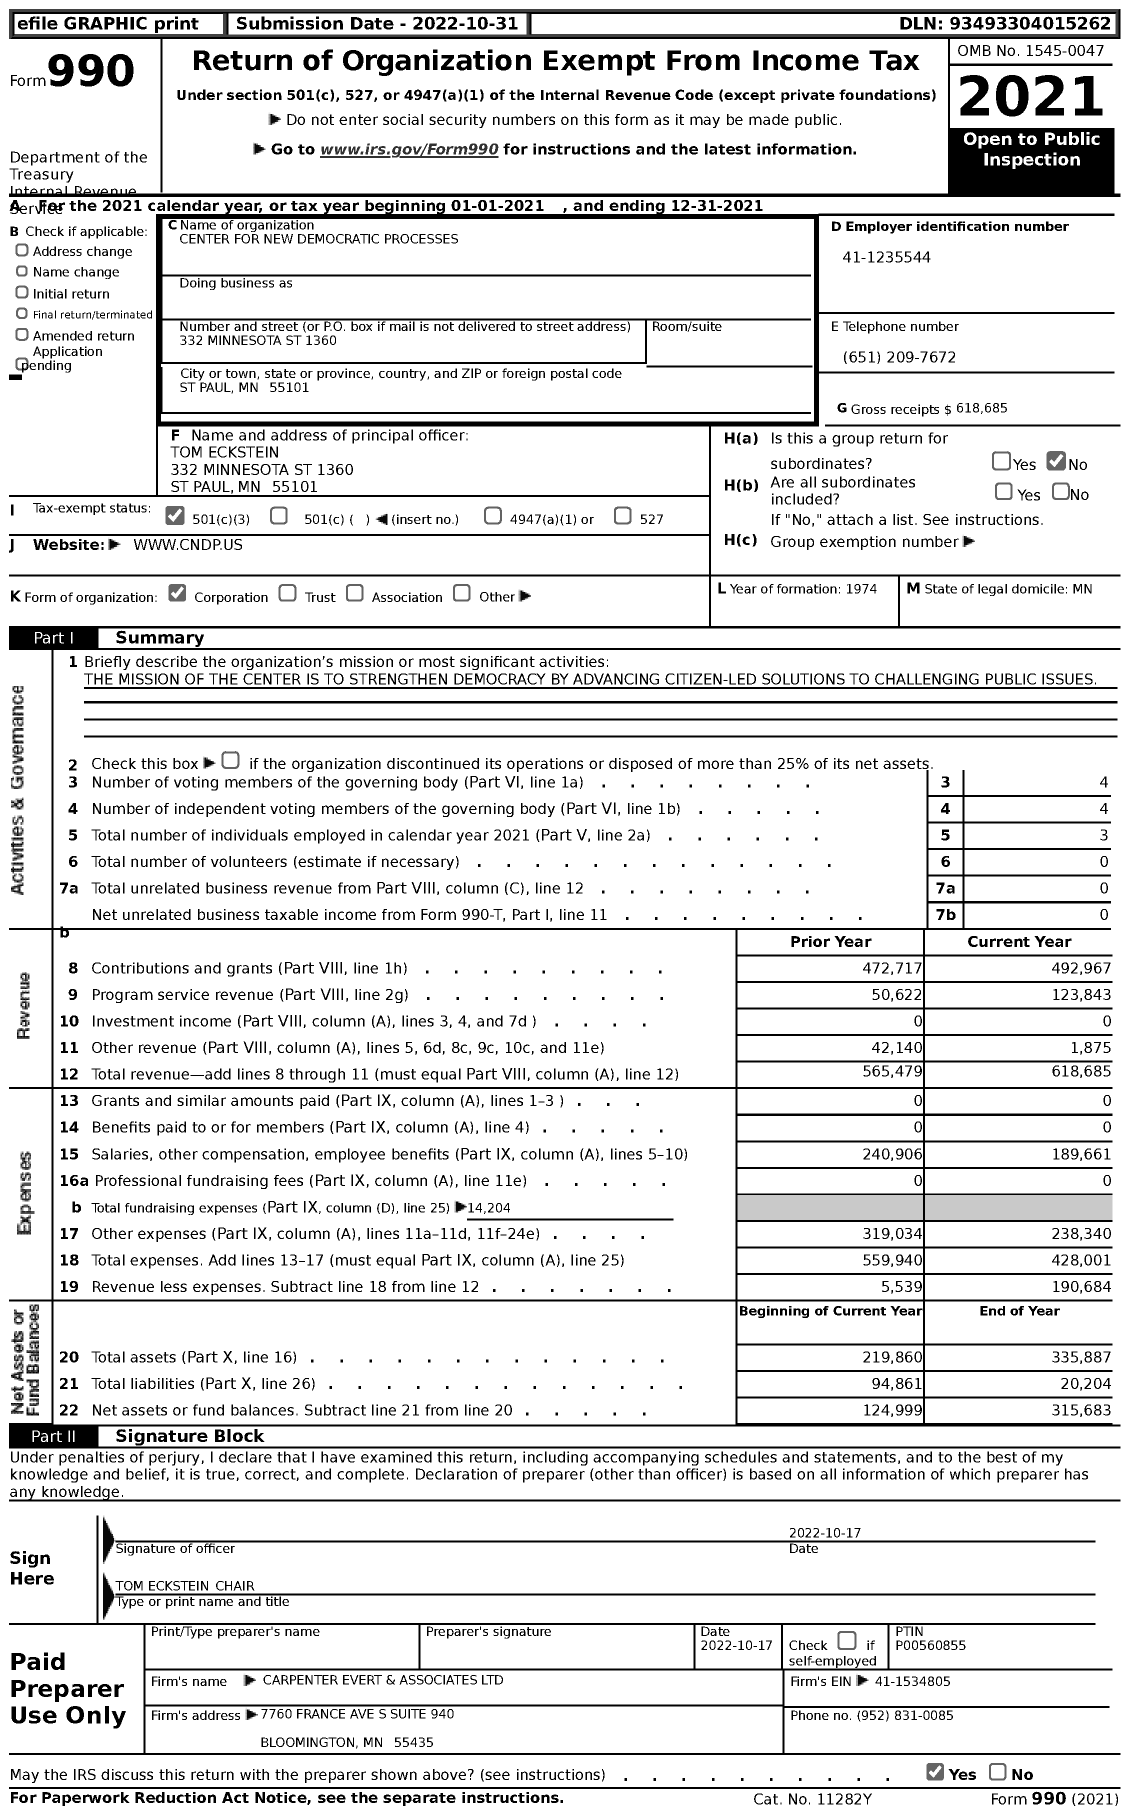 Image of first page of 2021 Form 990 for Center for New Democratic Processes